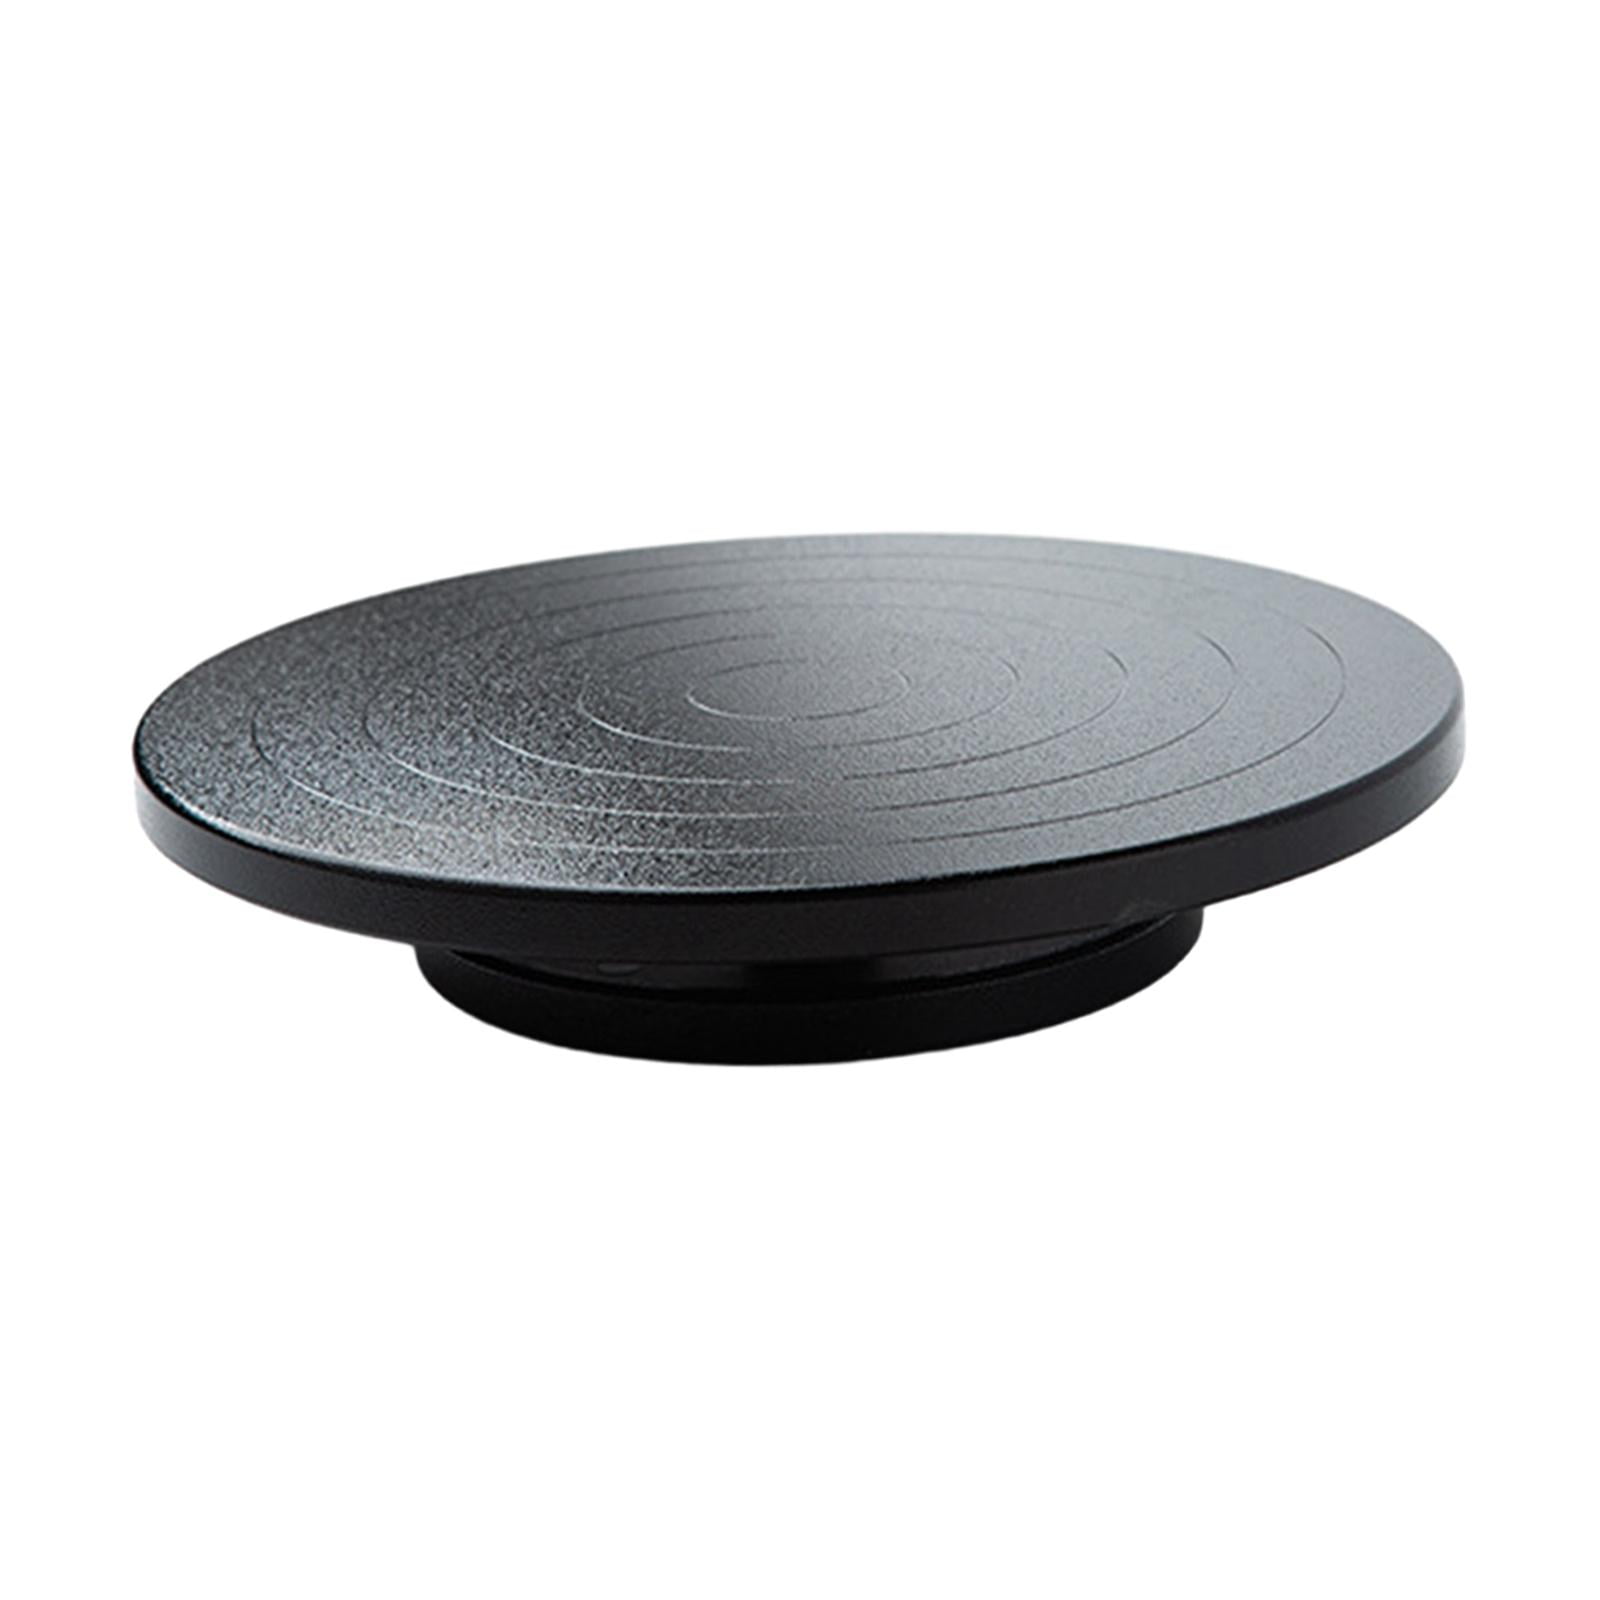 Pottery Sculpting Wheel Pottery Turntable Reusable Manual Lightweight Stand  Rotate Turntable Cake Turntable for Crafting Clay 15cm